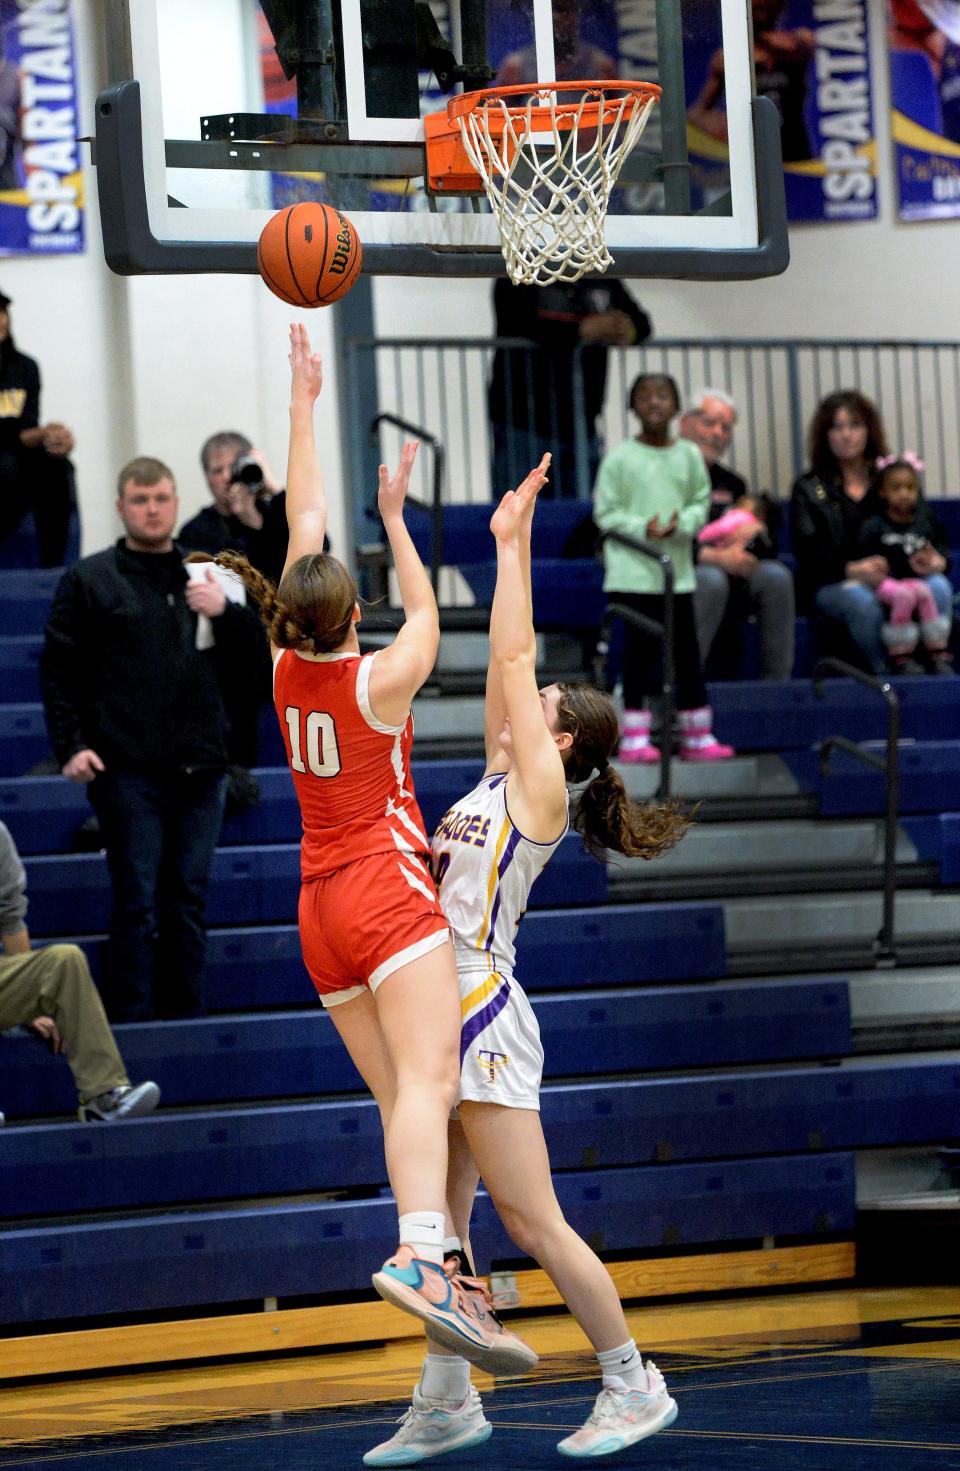 Glenwood's Makenna Yeager scores the winning basket in the last seconds of the game against Taylorville during the 3A Girls Basketball Regional Tournament Friday, February 16, 2024.